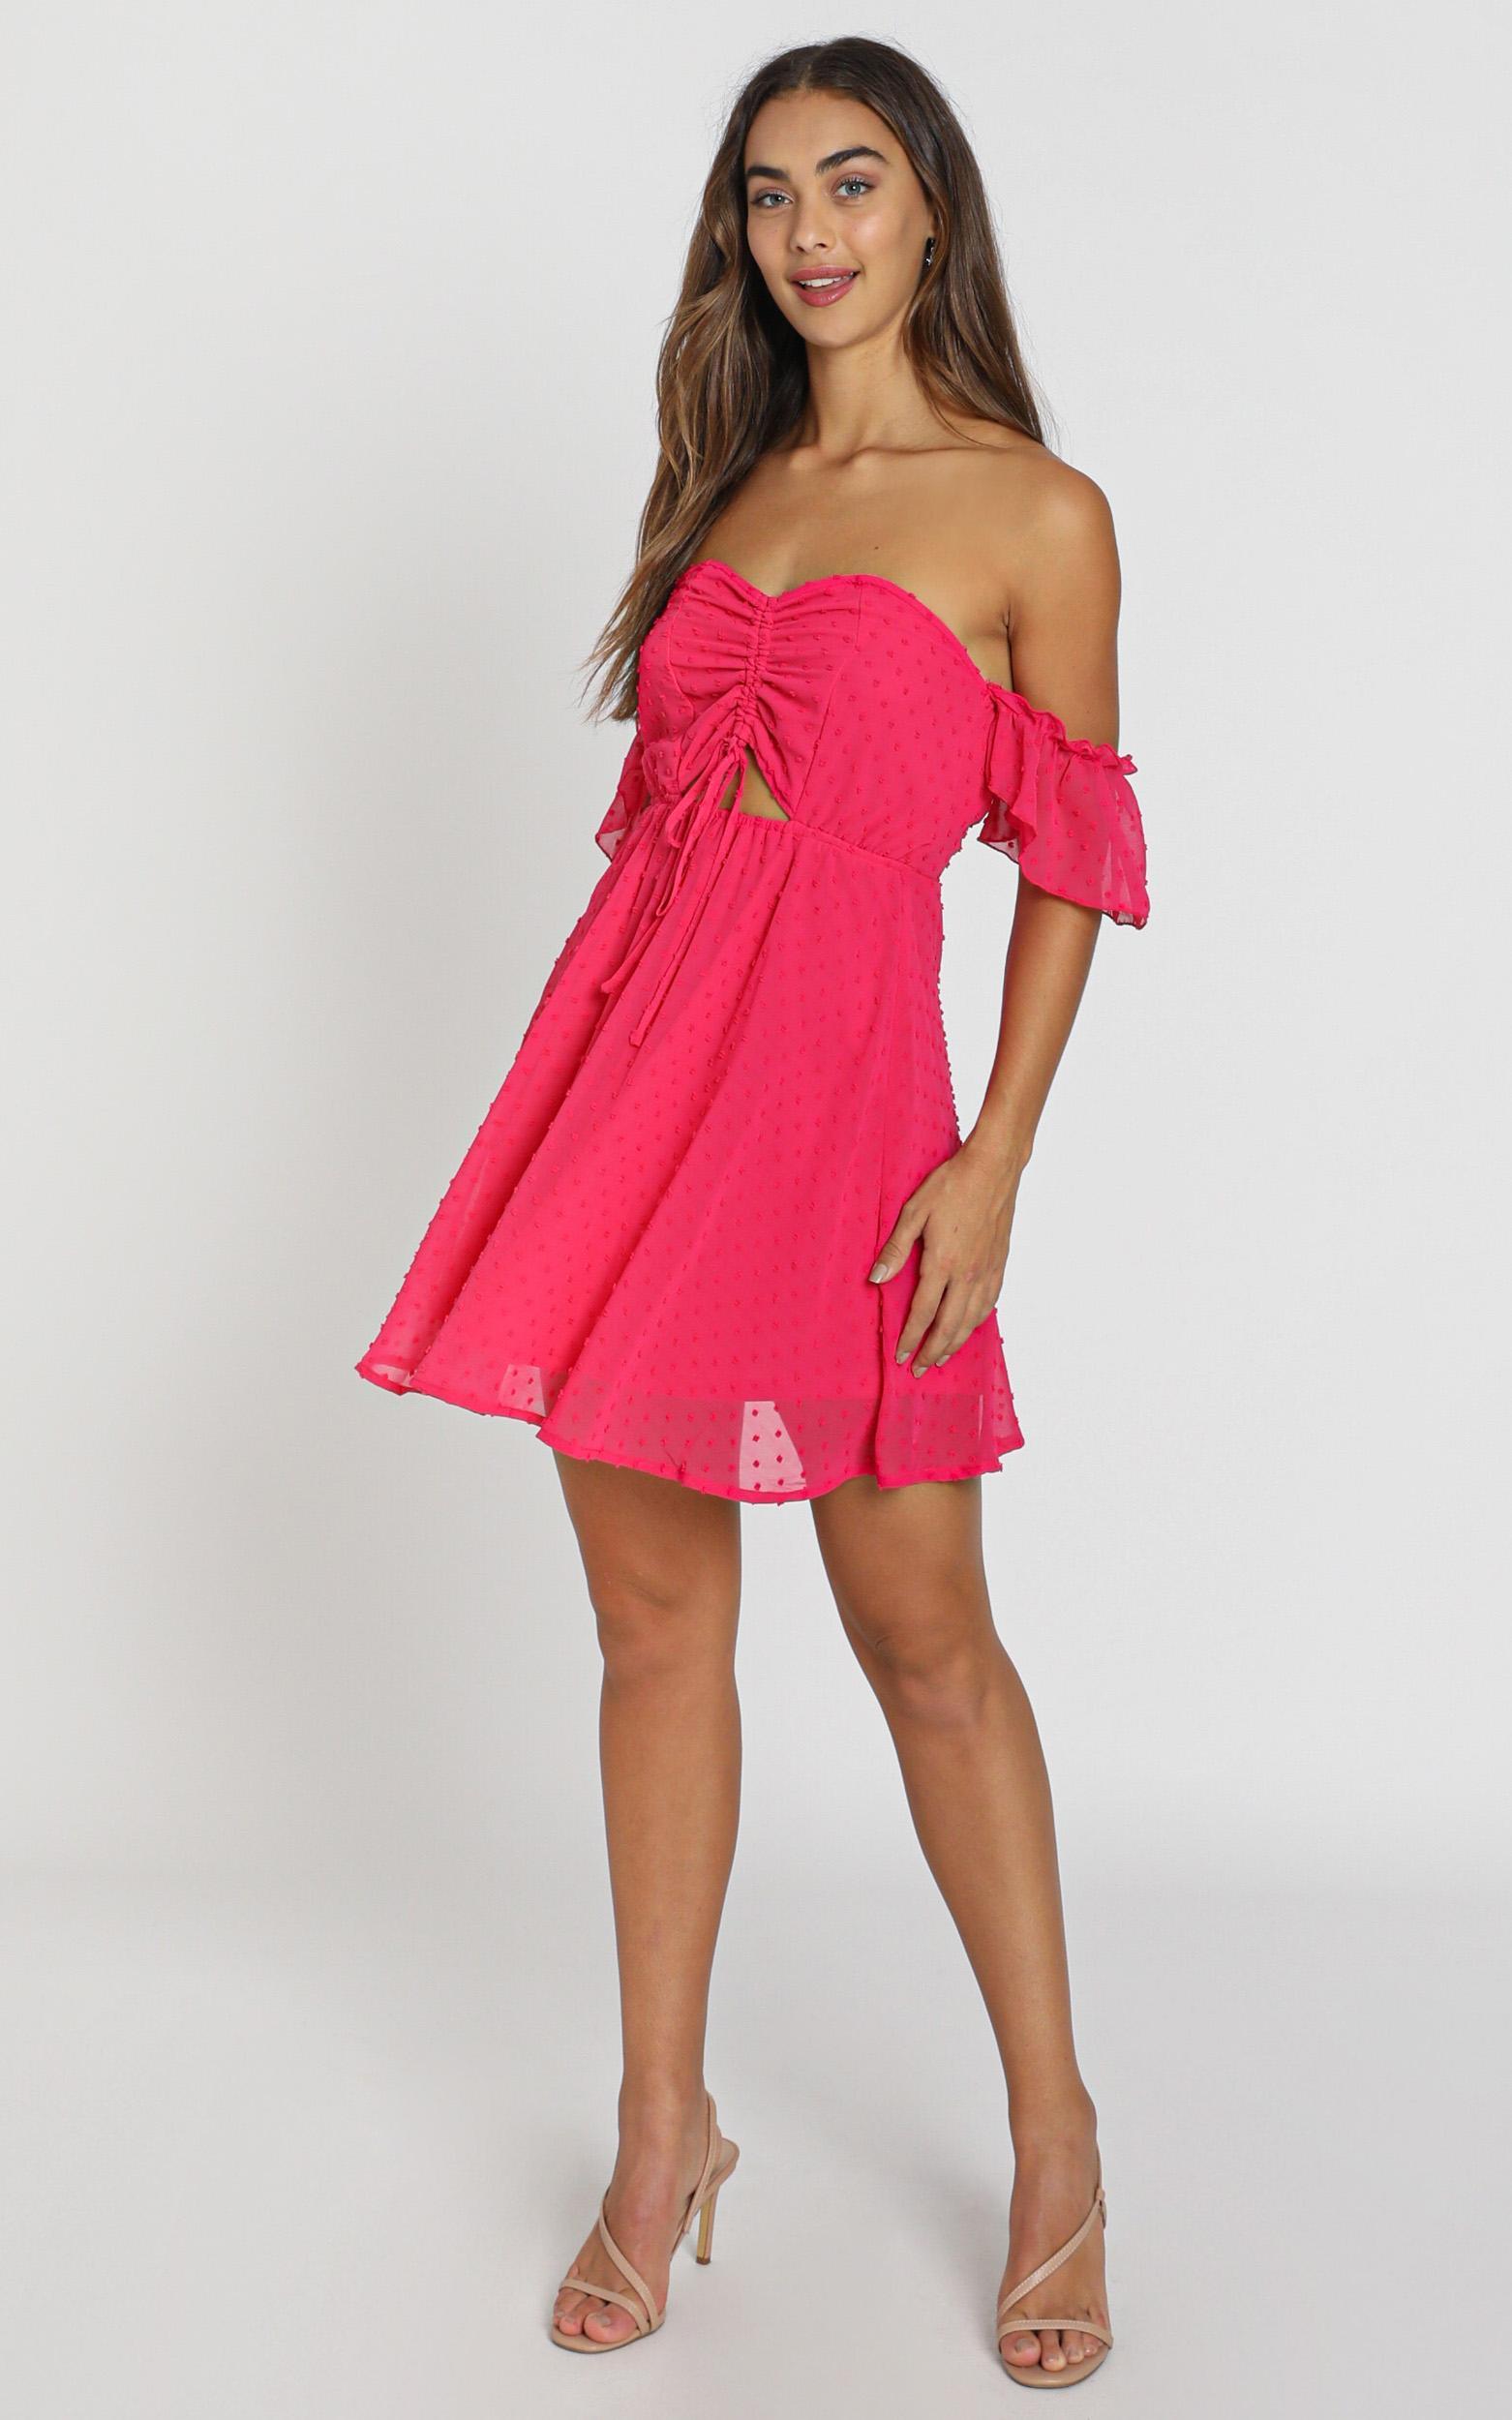 Nevis Dress in berry - 8 (S), Pink, hi-res image number null